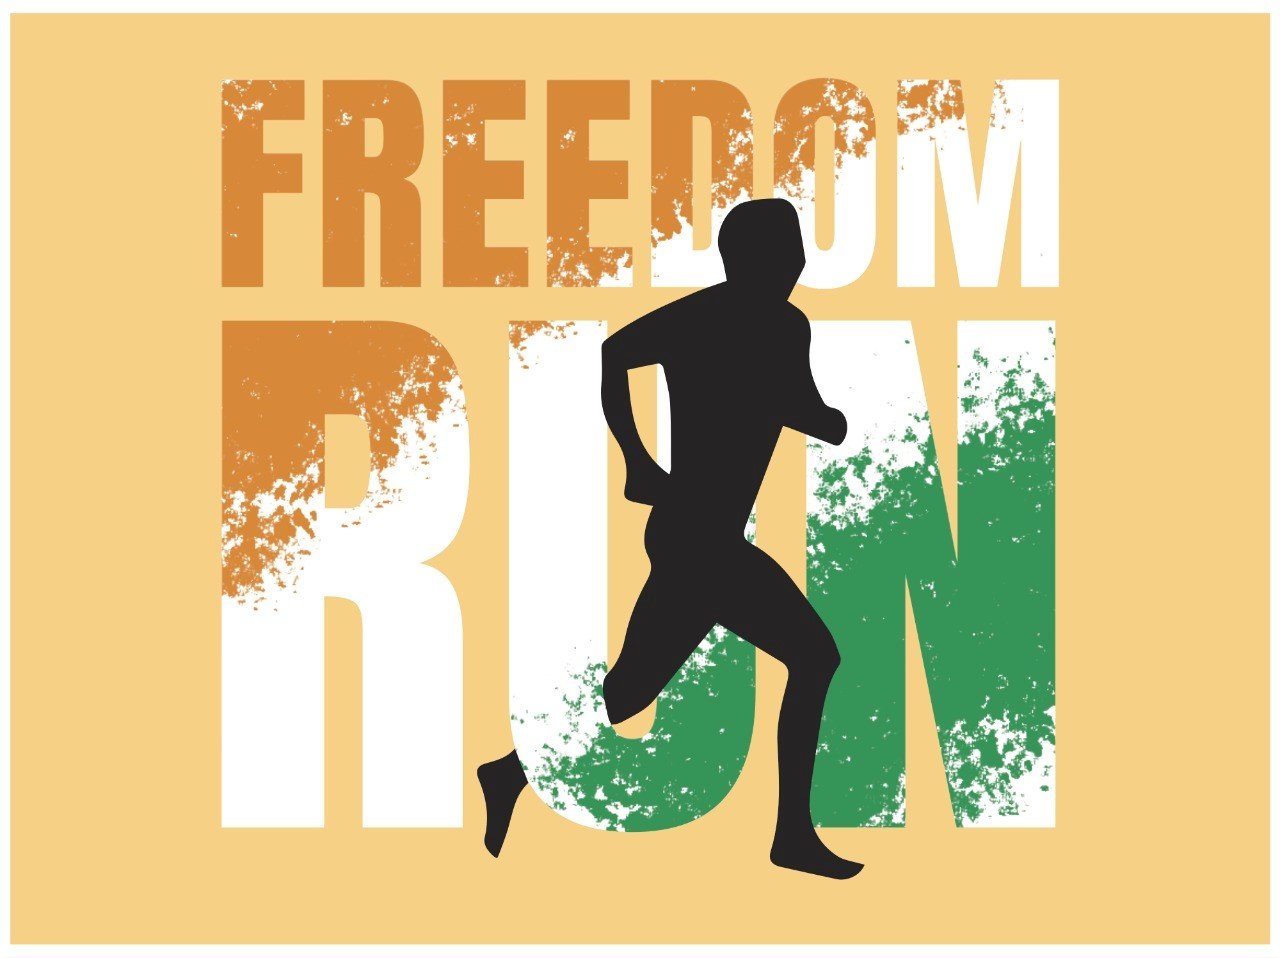 75 Years of Independence: 750 people to participate in ‘M3M India’s Freedom Run’